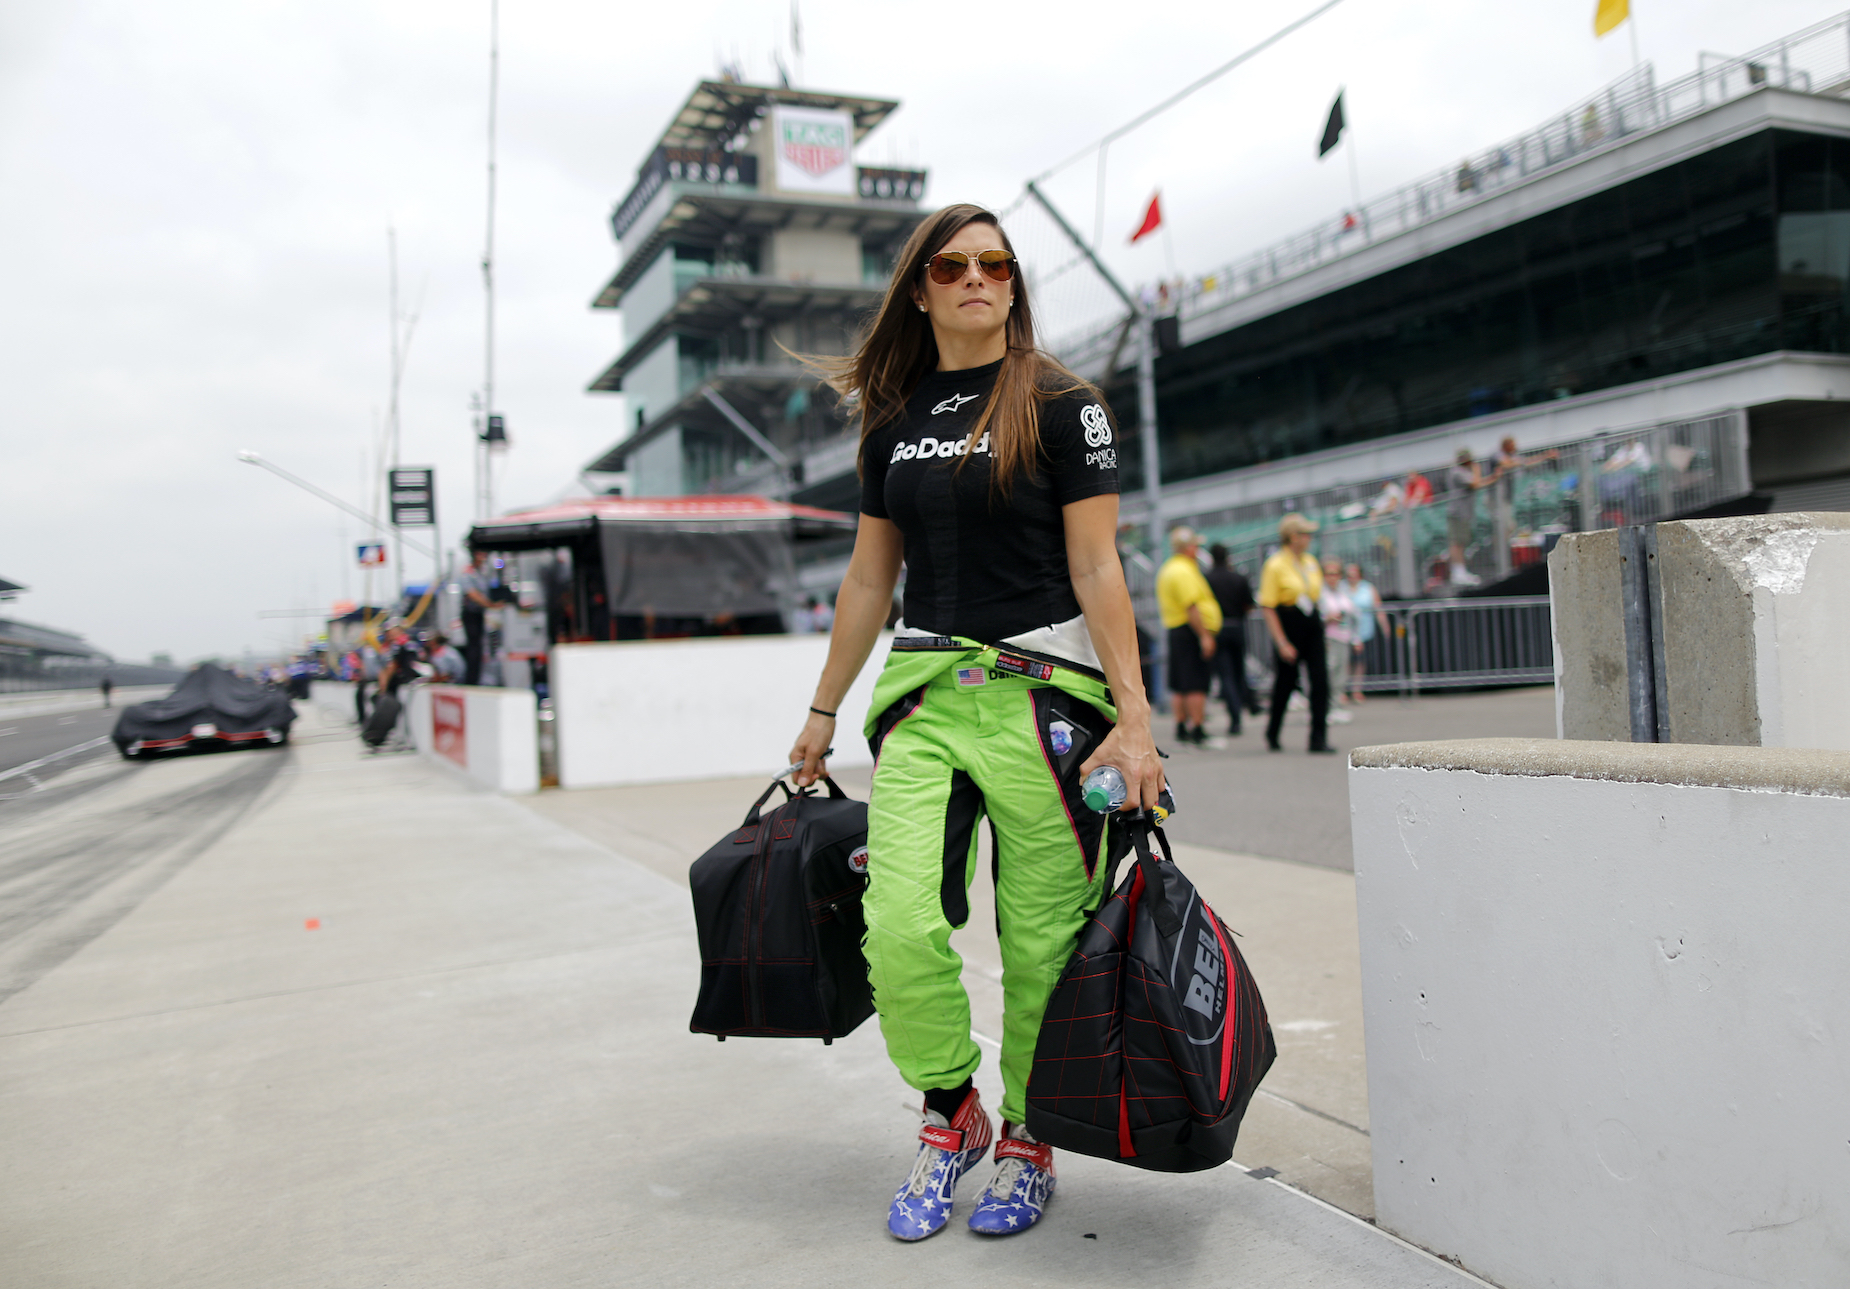 Before finding motorsports success, Danica Patrick spent a brief and unsuccessful time working in retail.